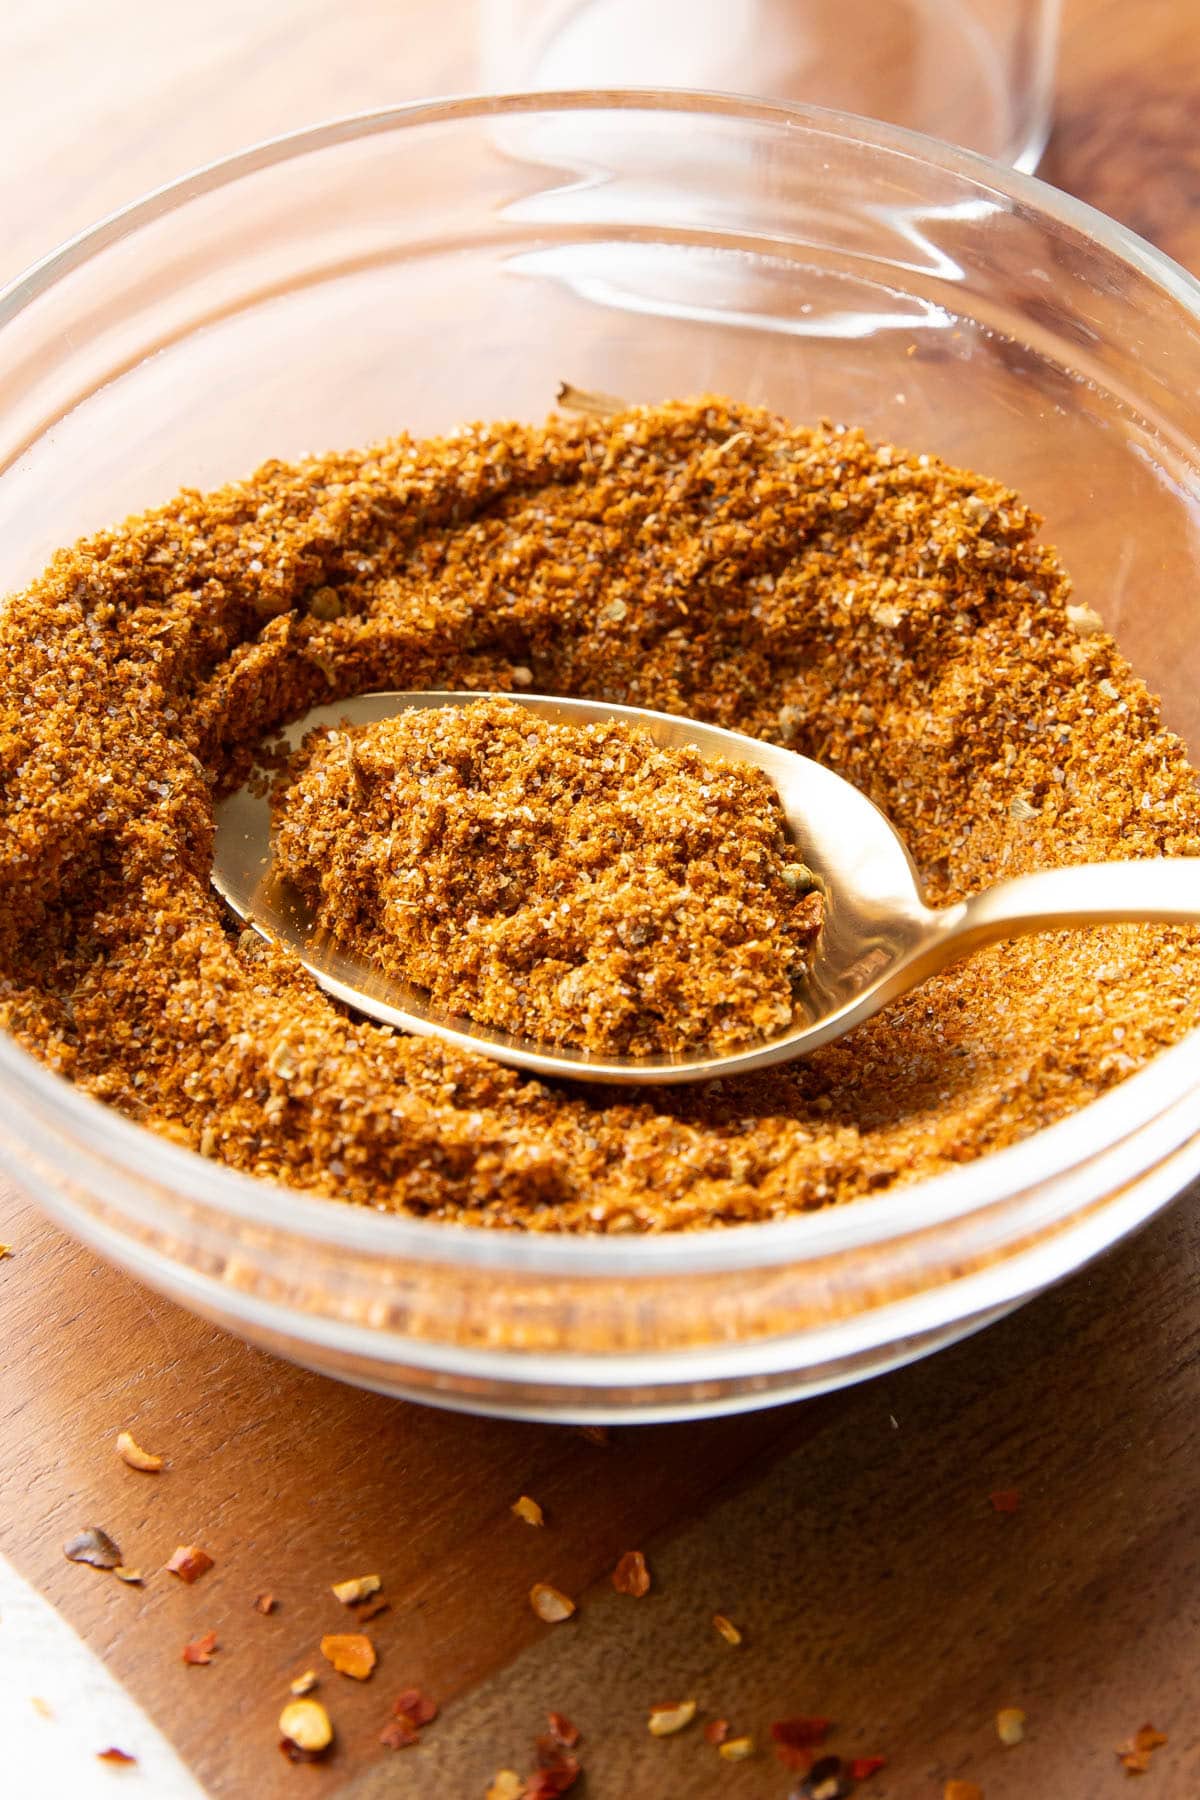 Close up to show textures of the Mexican-inspired spices in this blended seasoning recipe